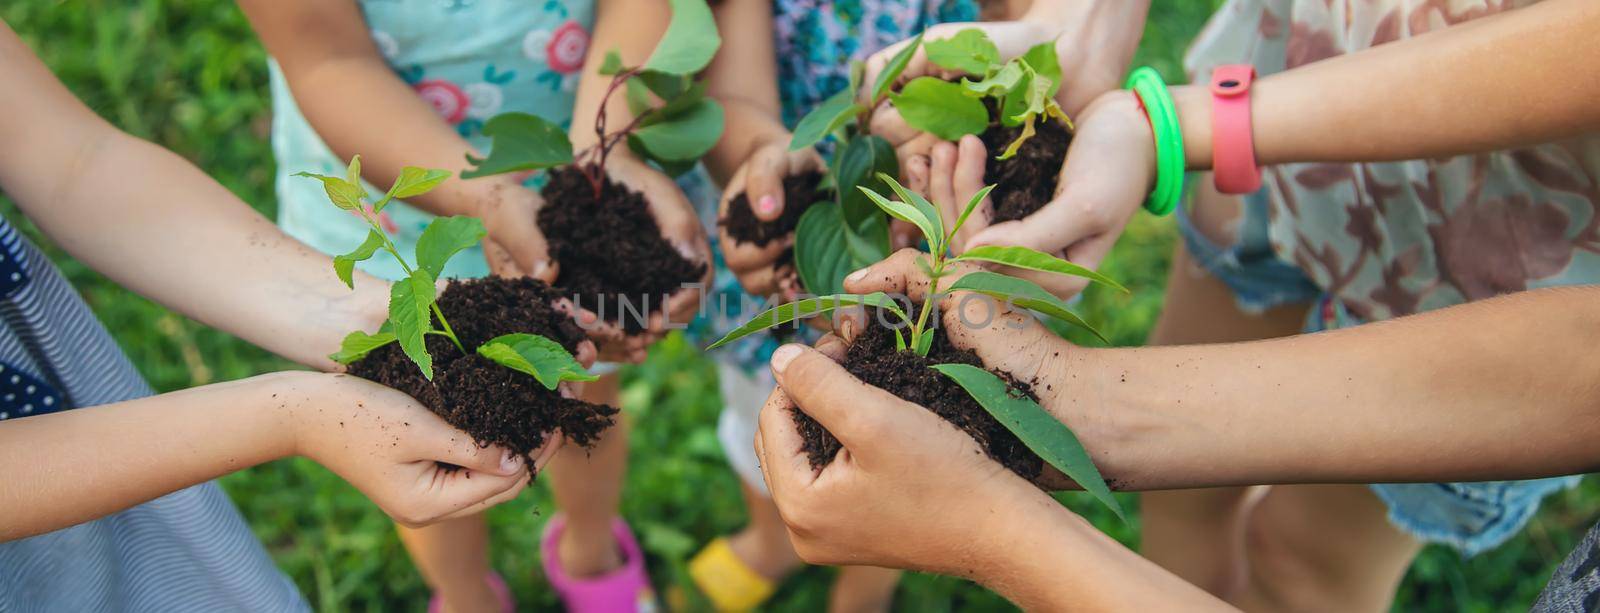 children plant plants together in their hands. Selective focus. nature.